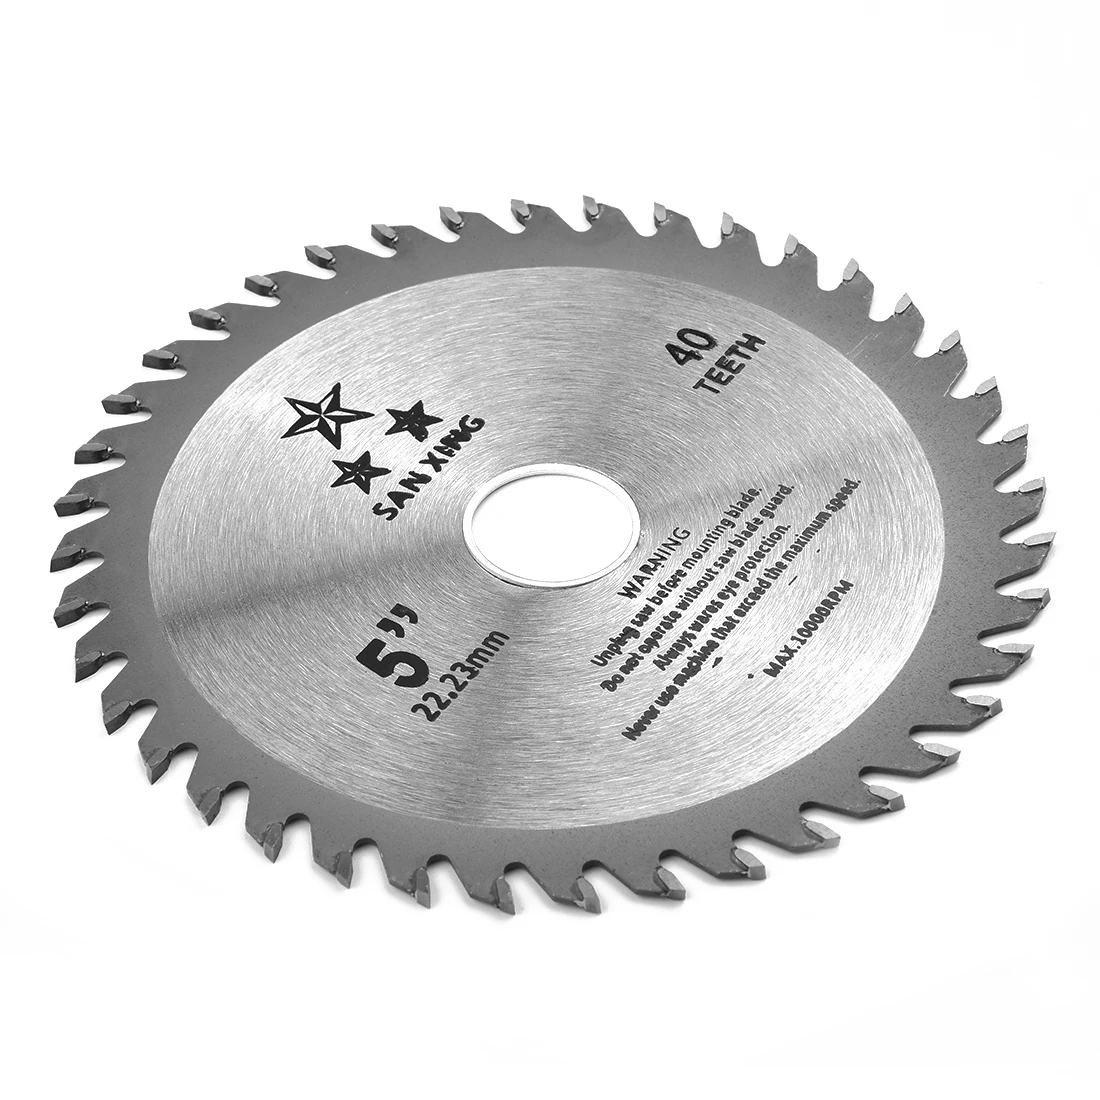 

5 Inch Table Cutting Disc 3mm Carbide Circular Saw Blade 40T Woodworking Rotary Cutting Disc Wheel For Wood Granite Marble